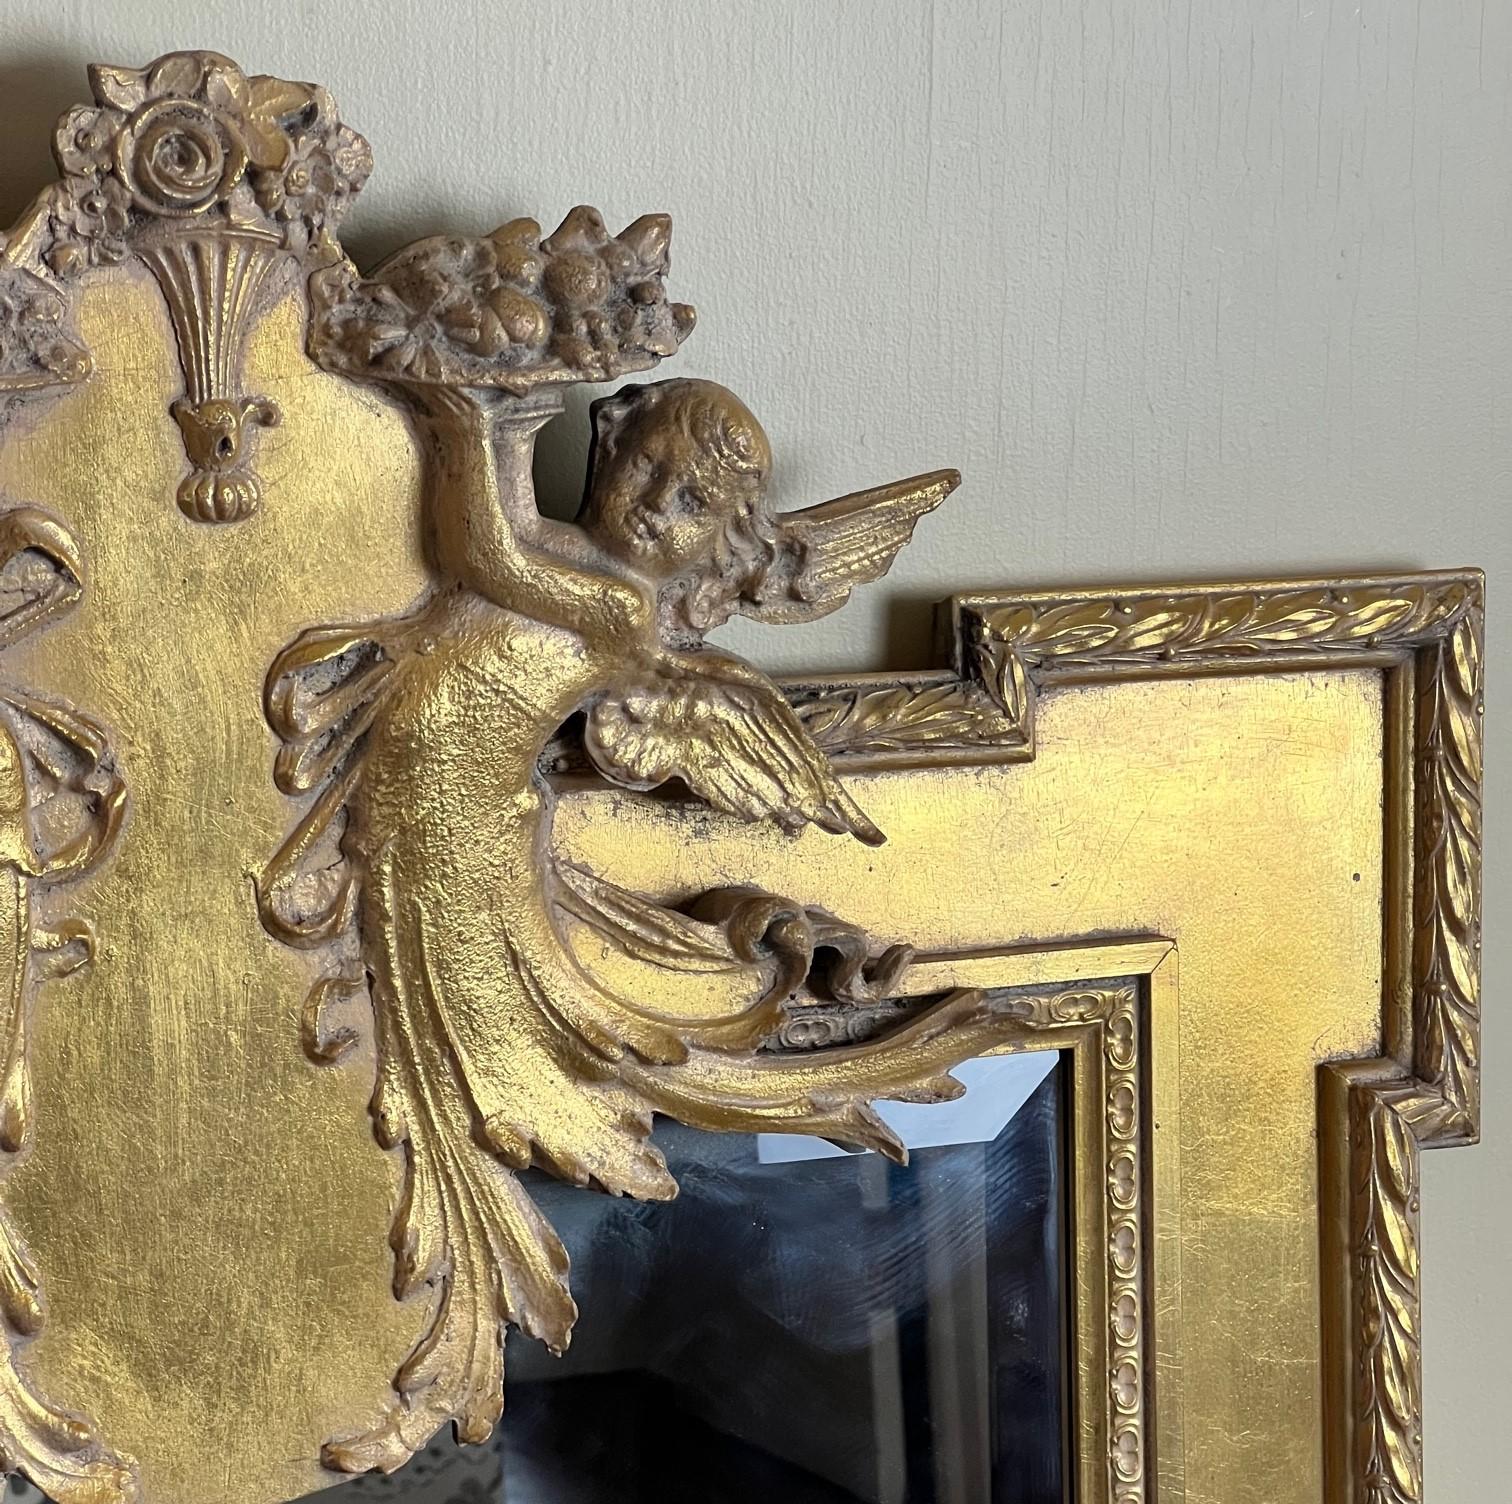 20th C. Neoclassical Style Giltwood Mirror with Cherub and Floral Decoration For Sale 6